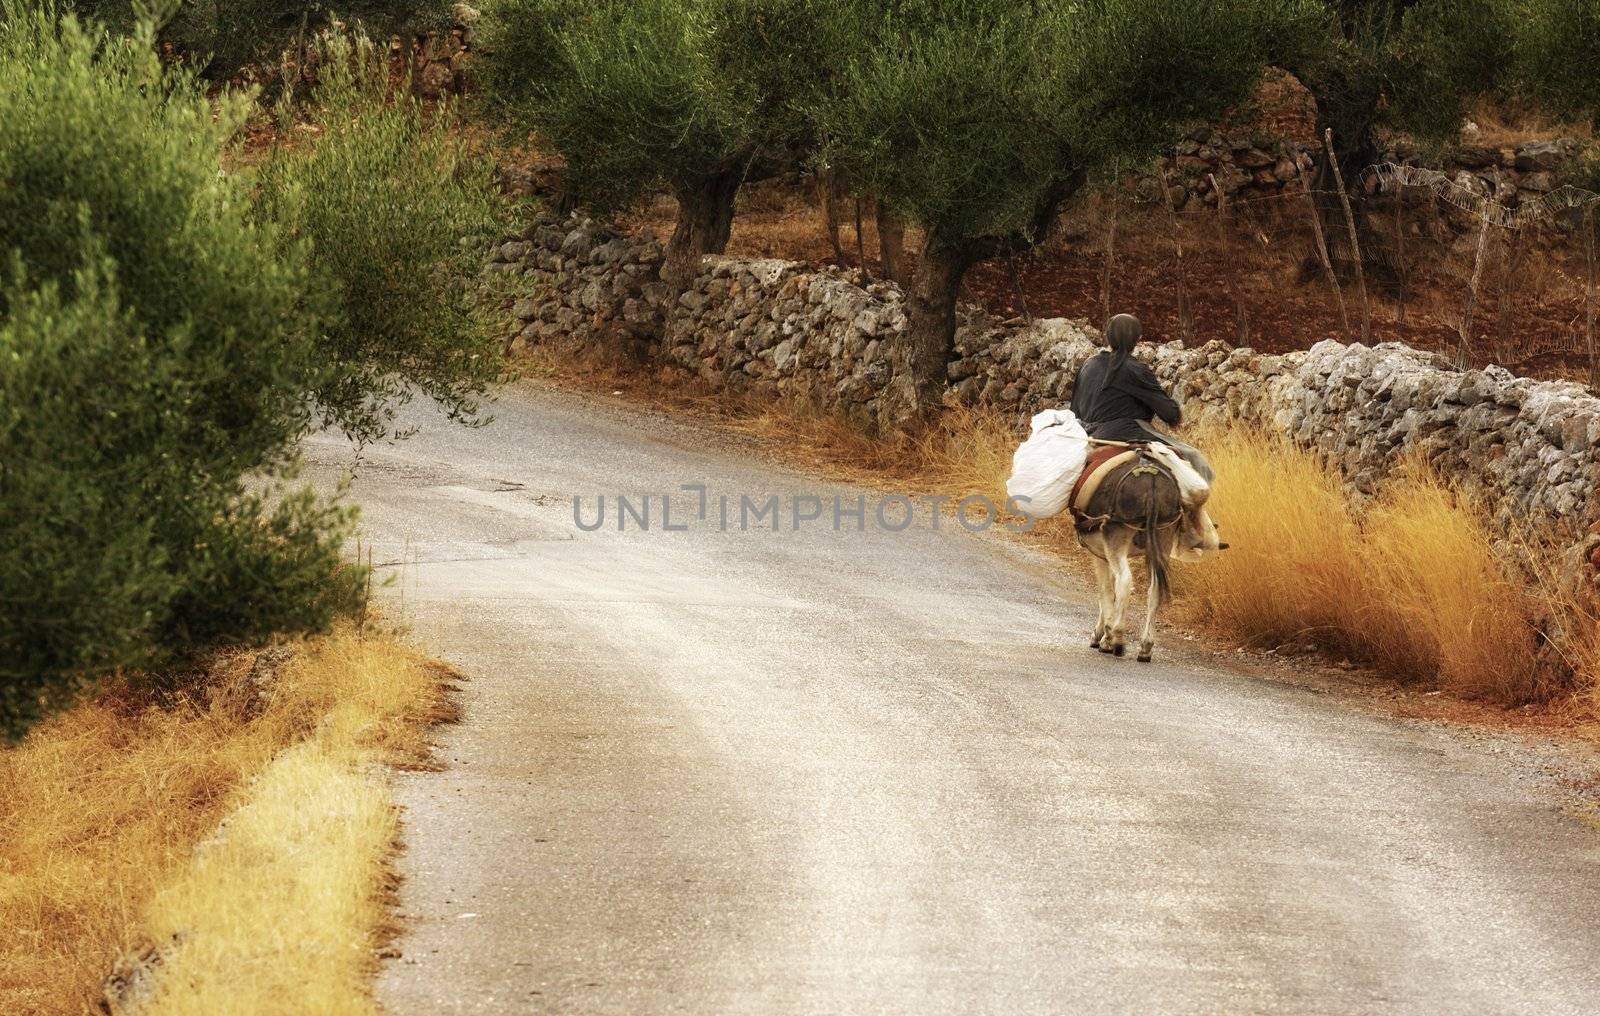 An old lady riding a donkey along a country road in Mani, southern Greece